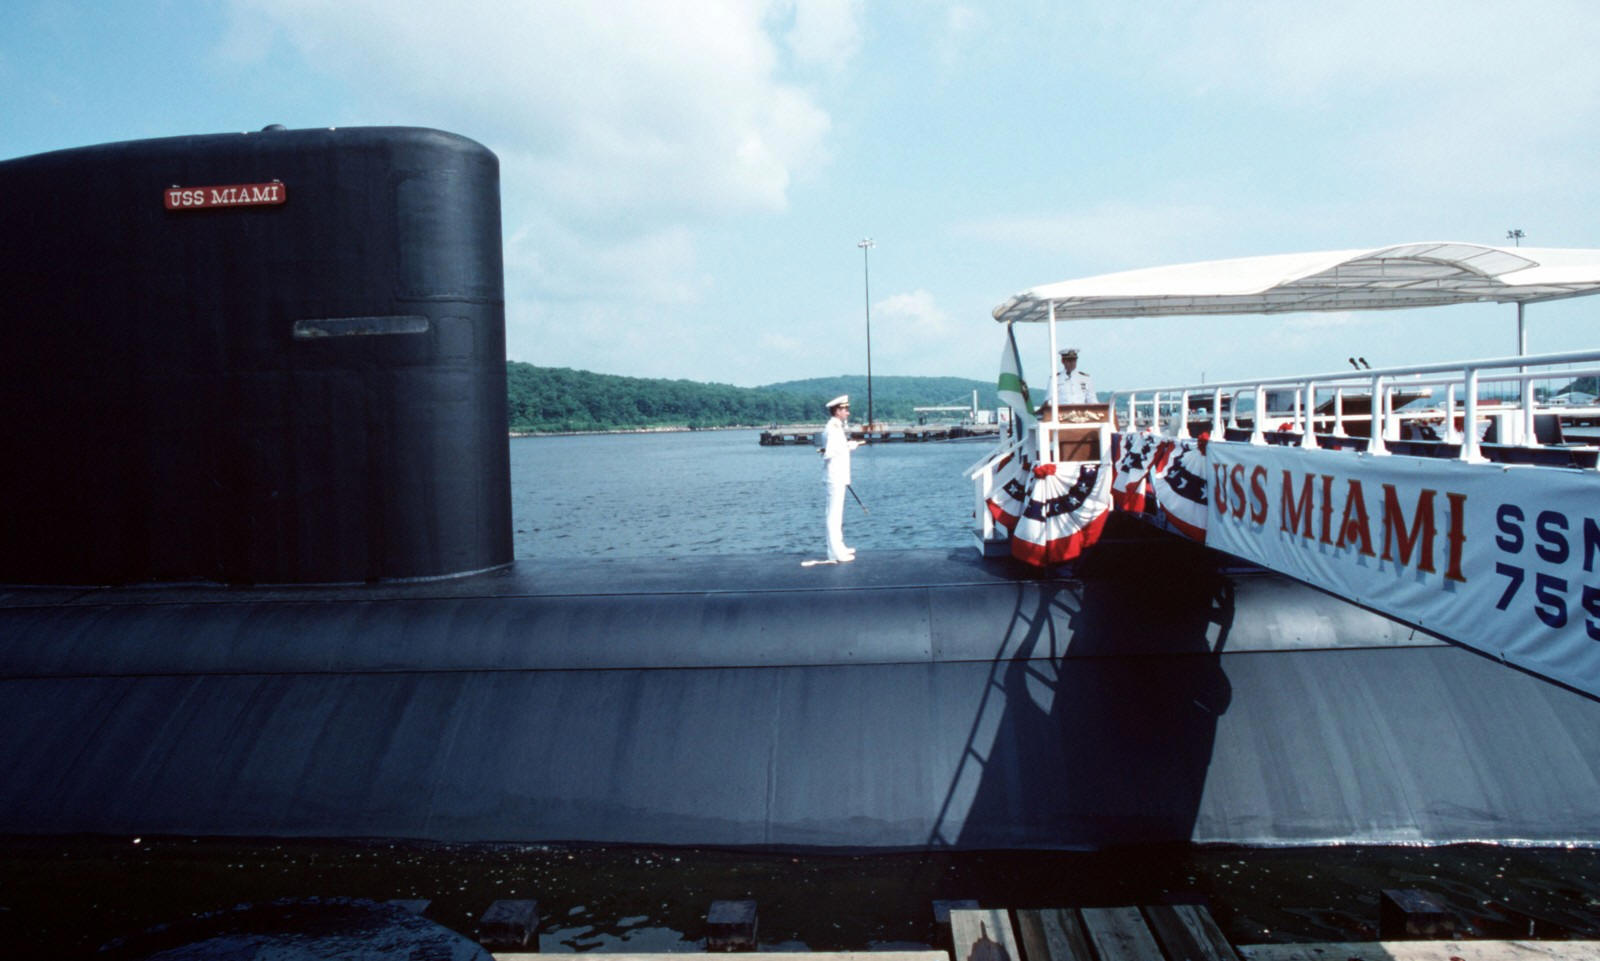 ssn-755 uss miami commissioning 1990